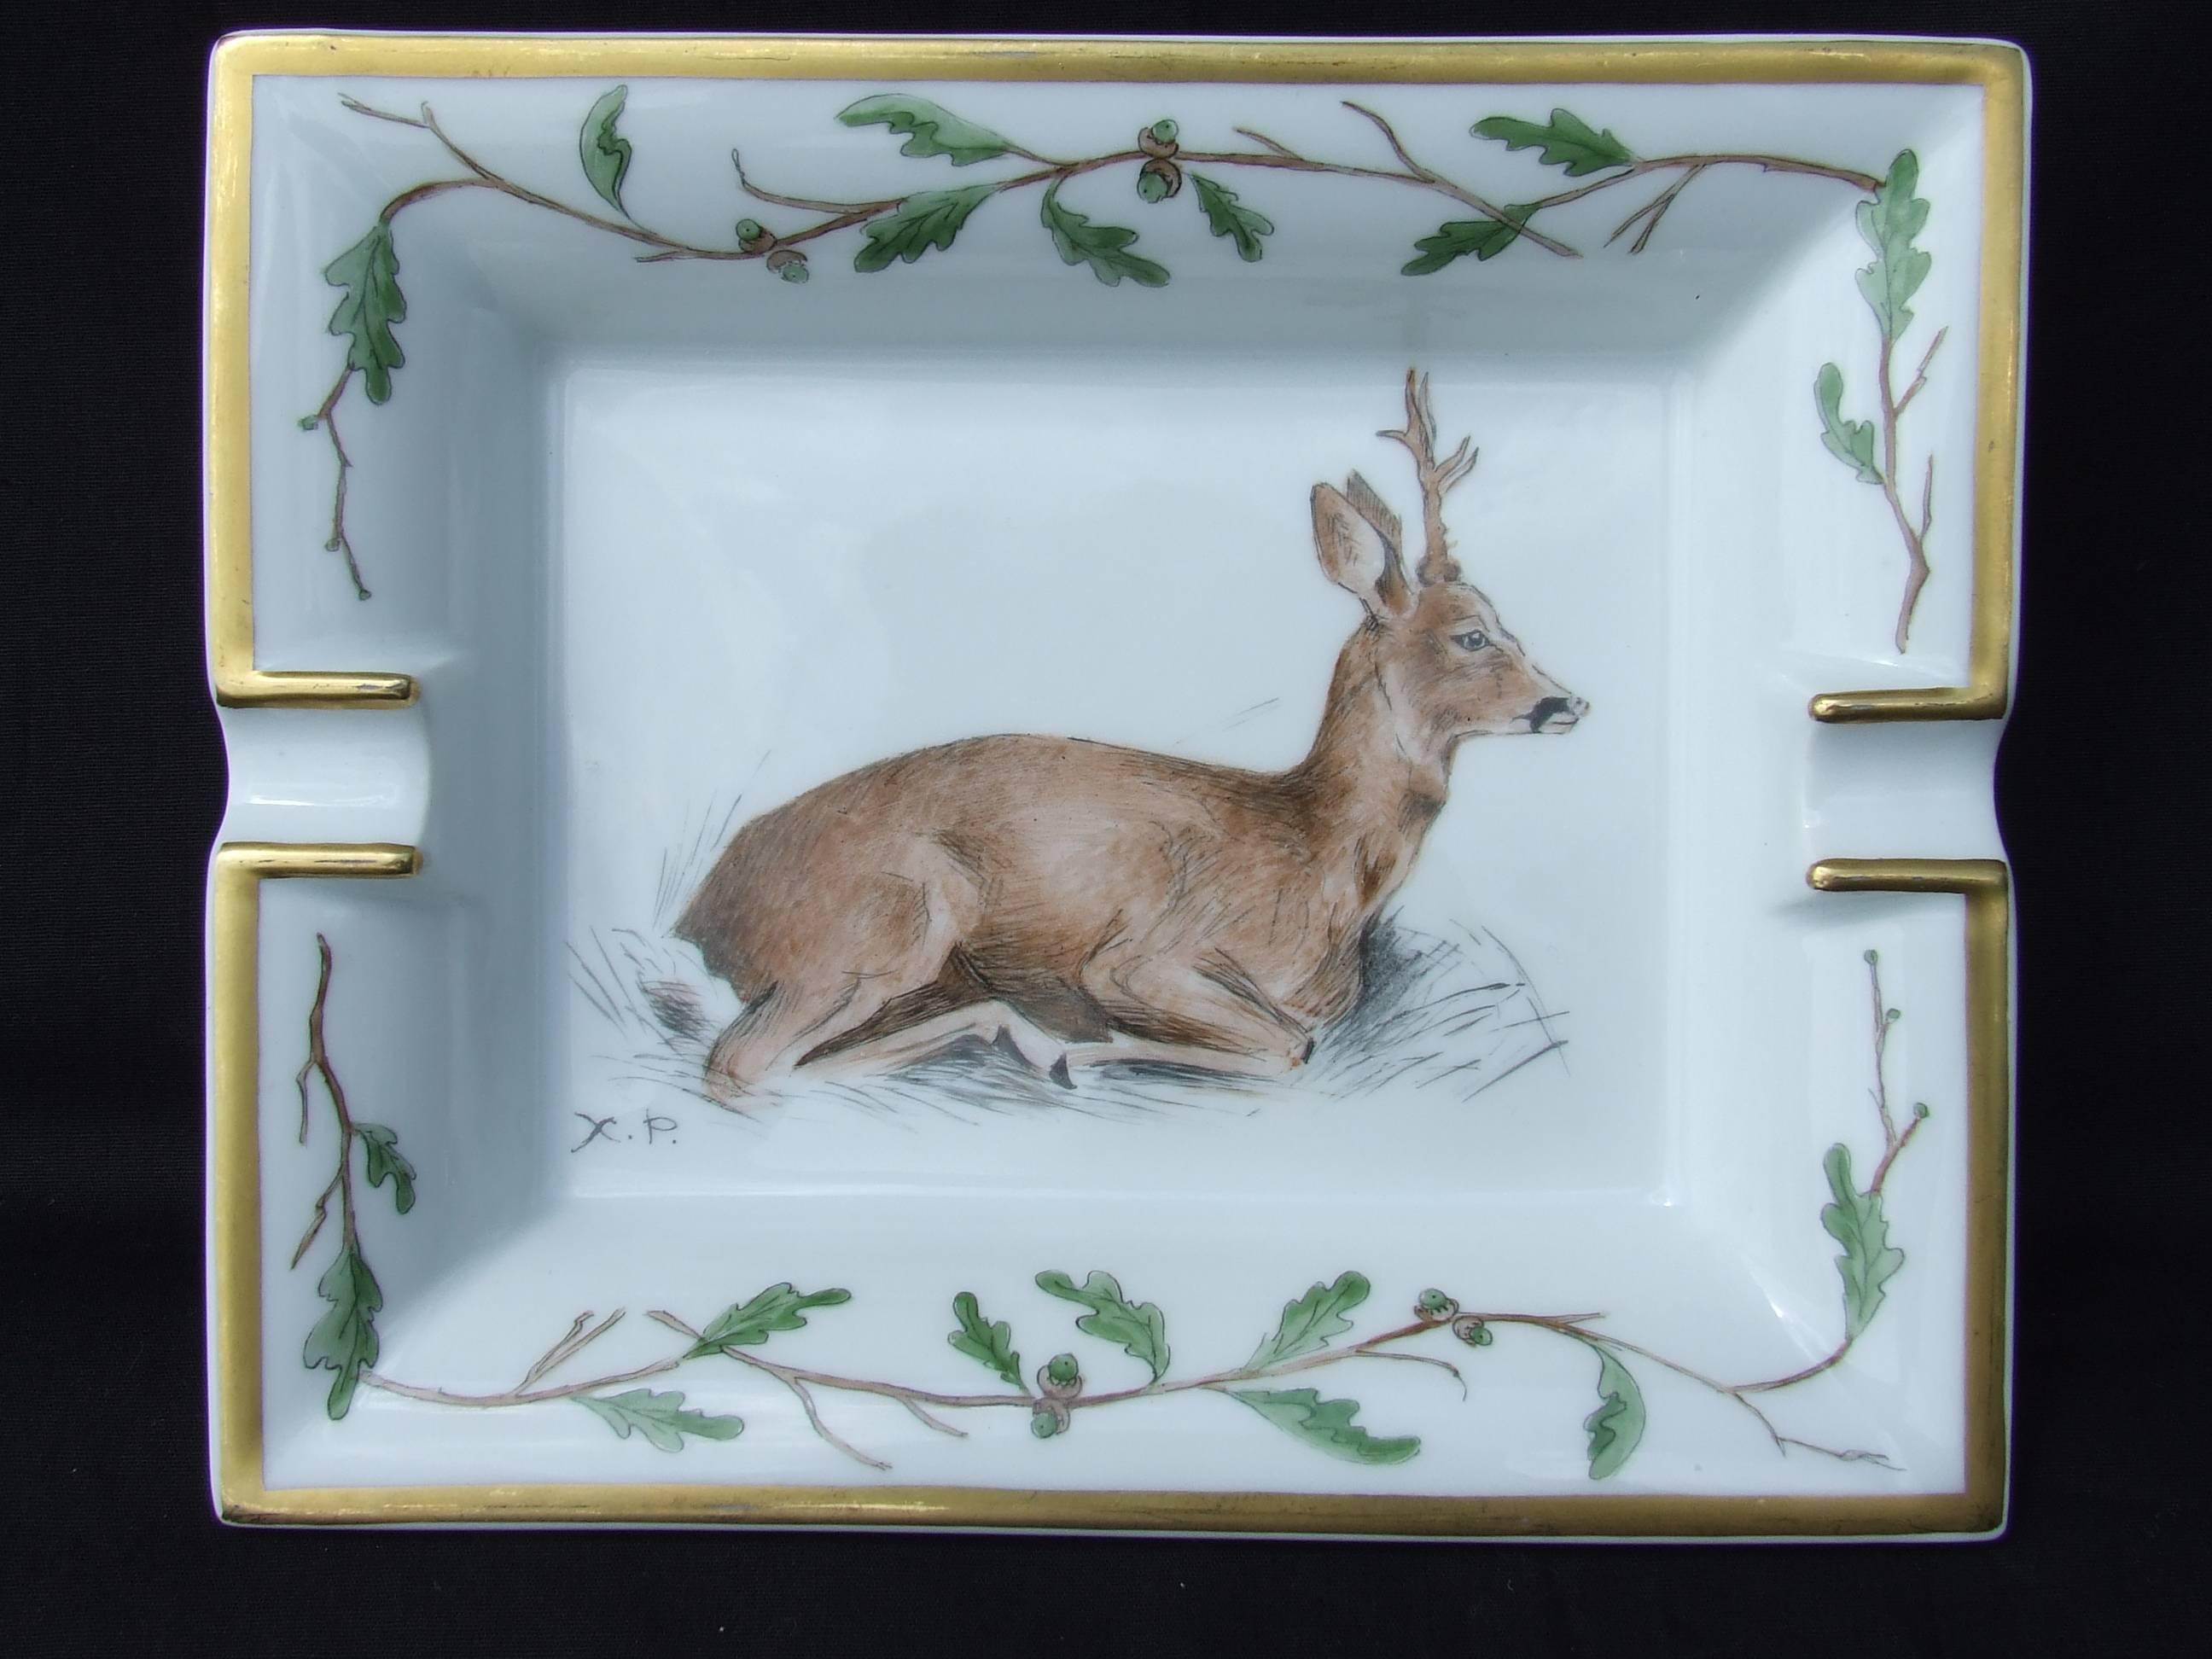 Rare Authentic Hermès Ashtray

Pattern: Deer in a setting of oak leaves and acorns

Made in France

Made of Printed Porcelain of Limoges 

Colorways: White Background, Light Brown Deer, Green and Brown oak Leaves, Golden Border. 

